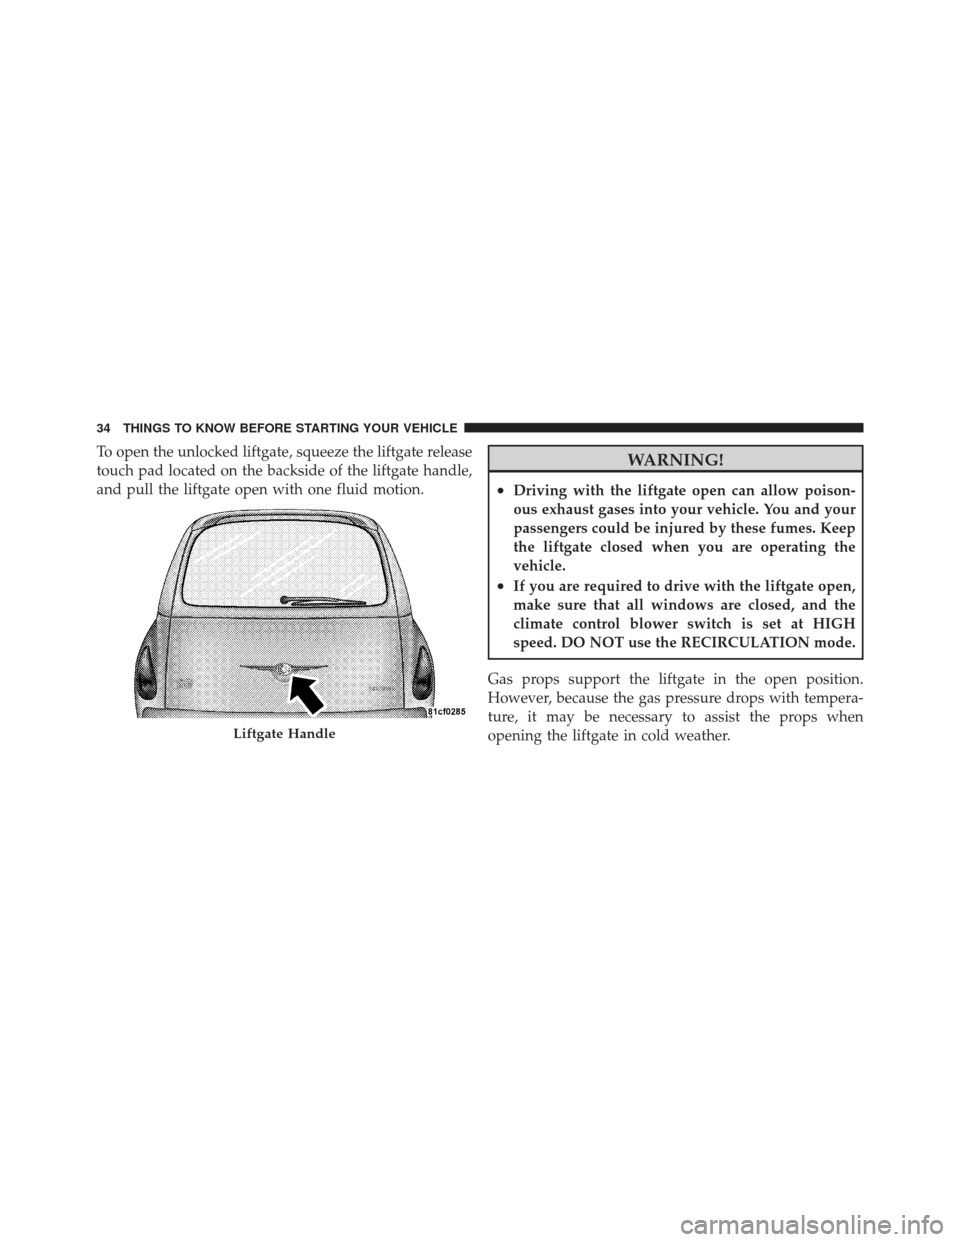 CHRYSLER PT CRUISER 2009 1.G Owners Manual To open the unlocked liftgate, squeeze the liftgate release
touch pad located on the backside of the liftgate handle,
and pull the liftgate open with one fluid motion.WARNING!
•Driving with the lift